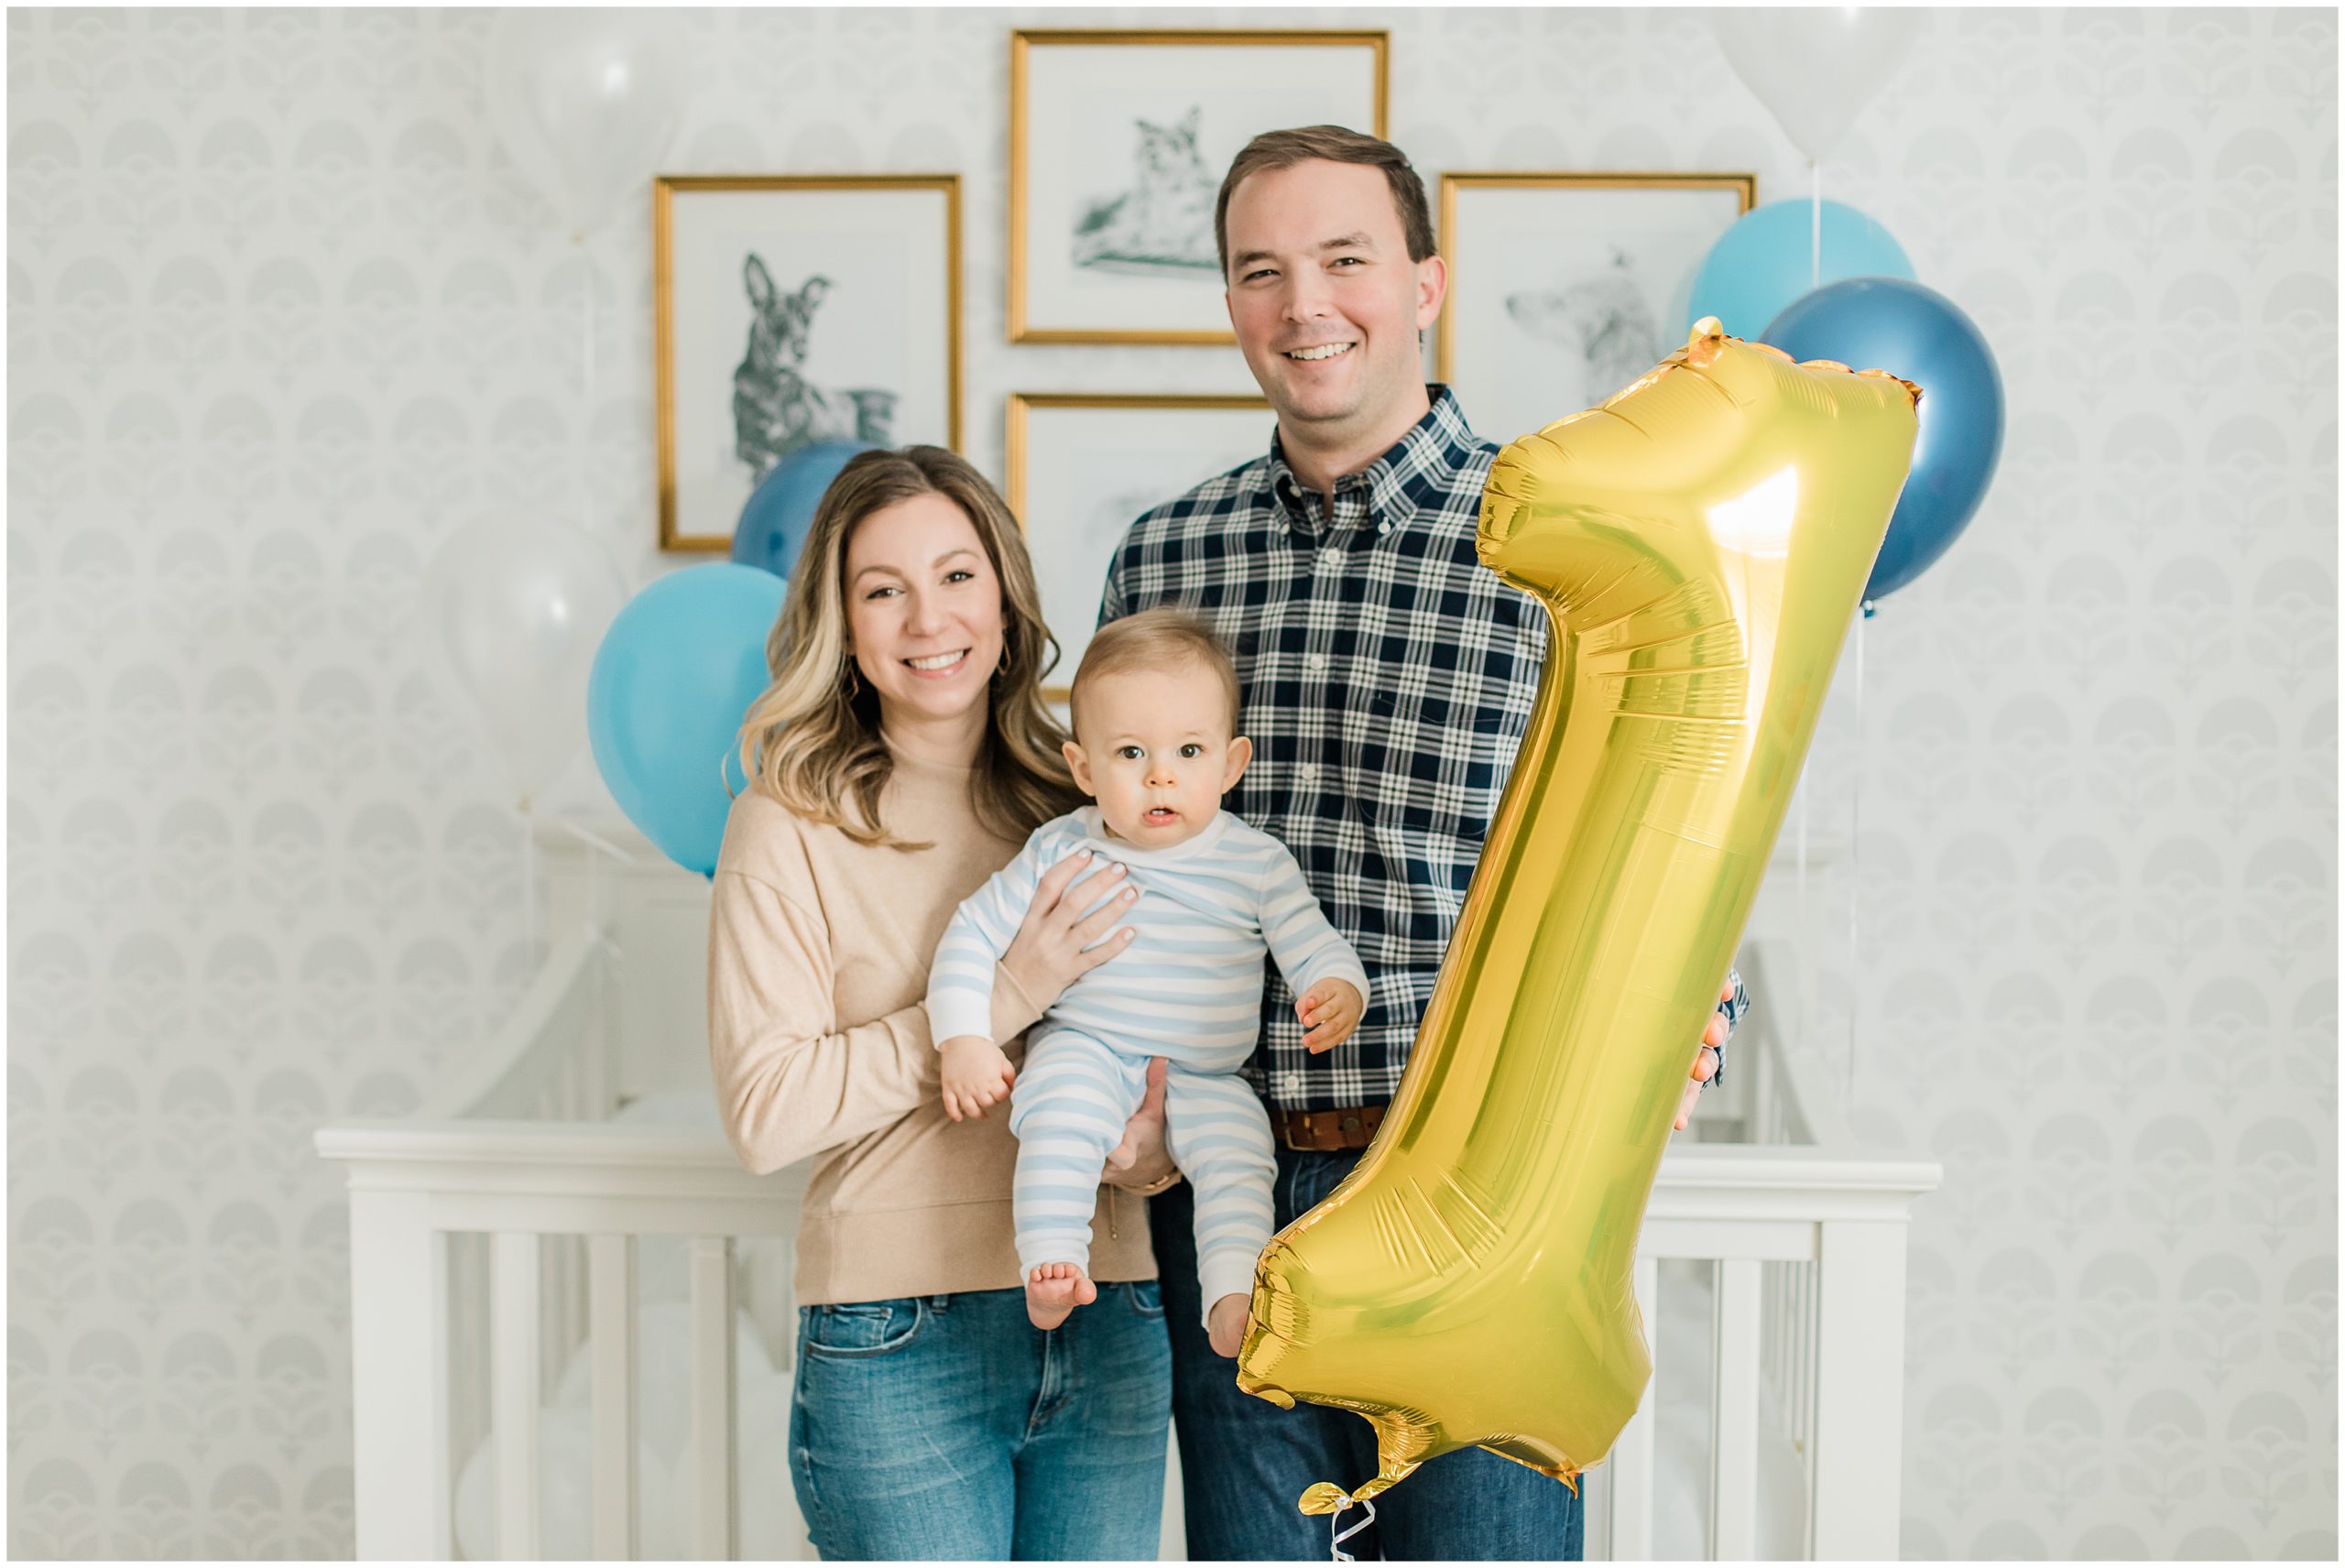 family poses with one year old by crib at home